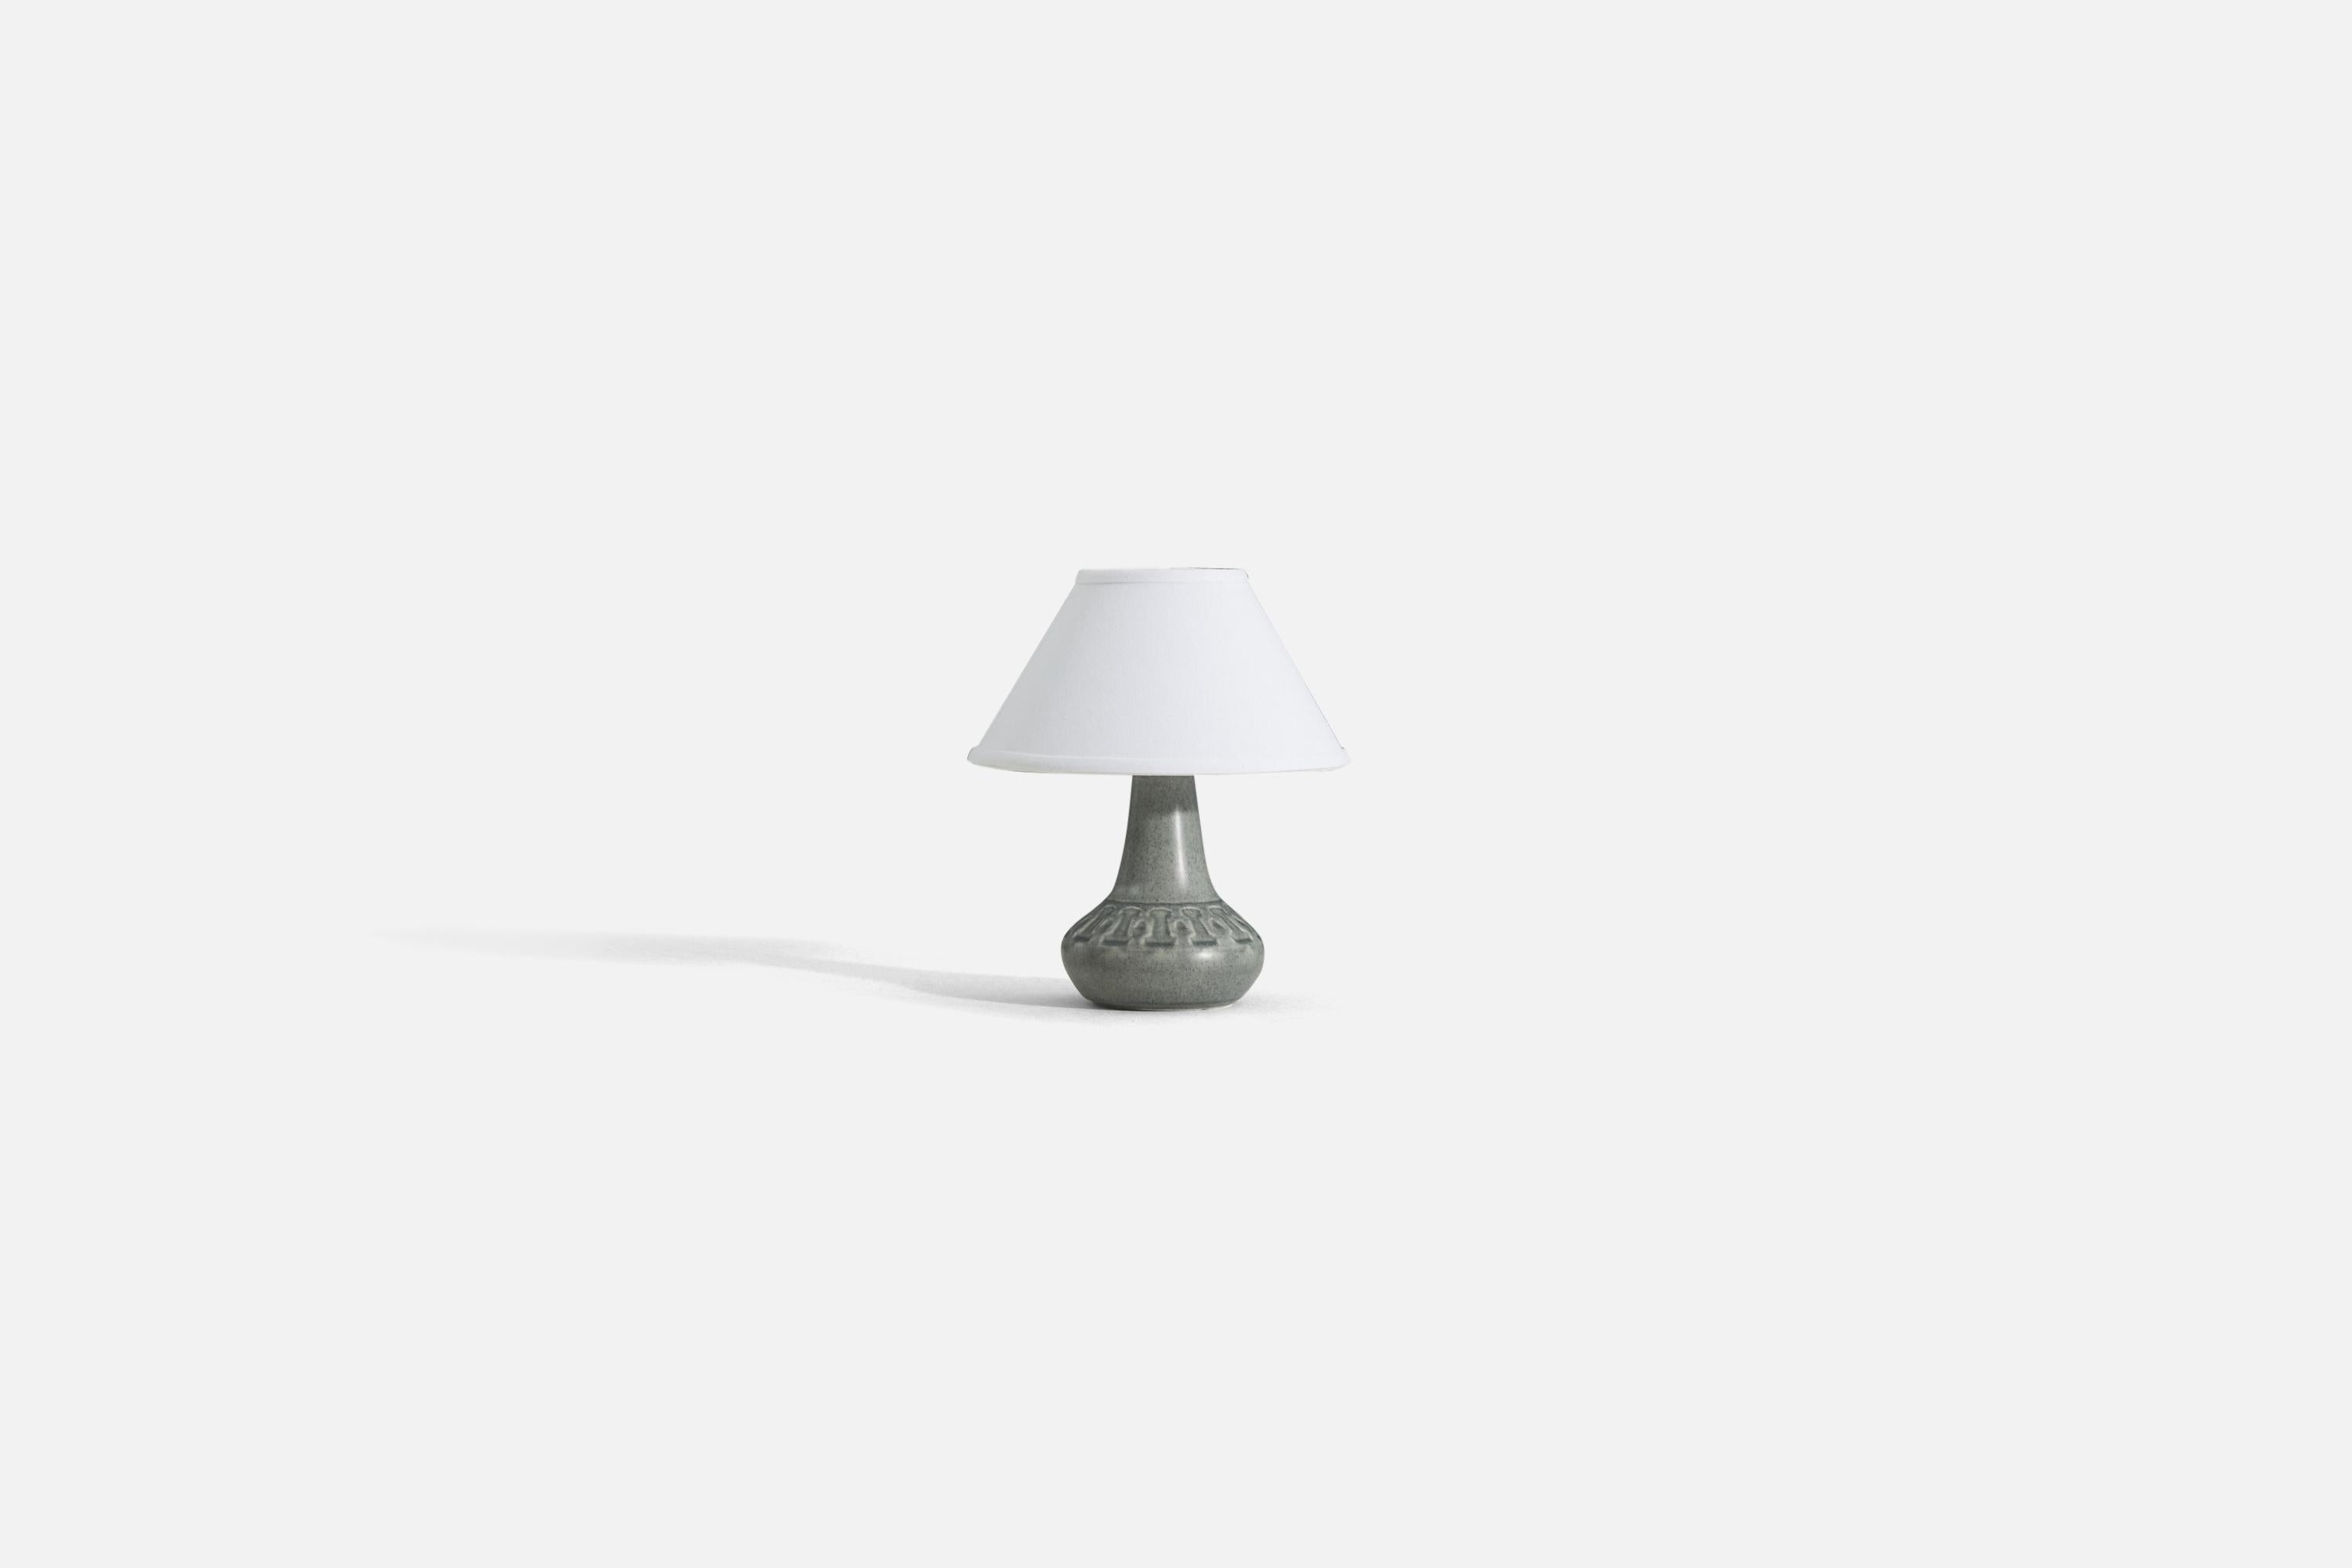 A gray glazed glazed stoneware table lamp, produced by Søholm Stentøj, Bornholm, Denmark, 1960s.

Sold without lampshade. 
Dimensions of Lamp (inches) : 9.5 x 5.5 x 5.5 (H x W x D)
Dimensions Shade (inches) : 4.5 x 10.25 x 6 (T x B x